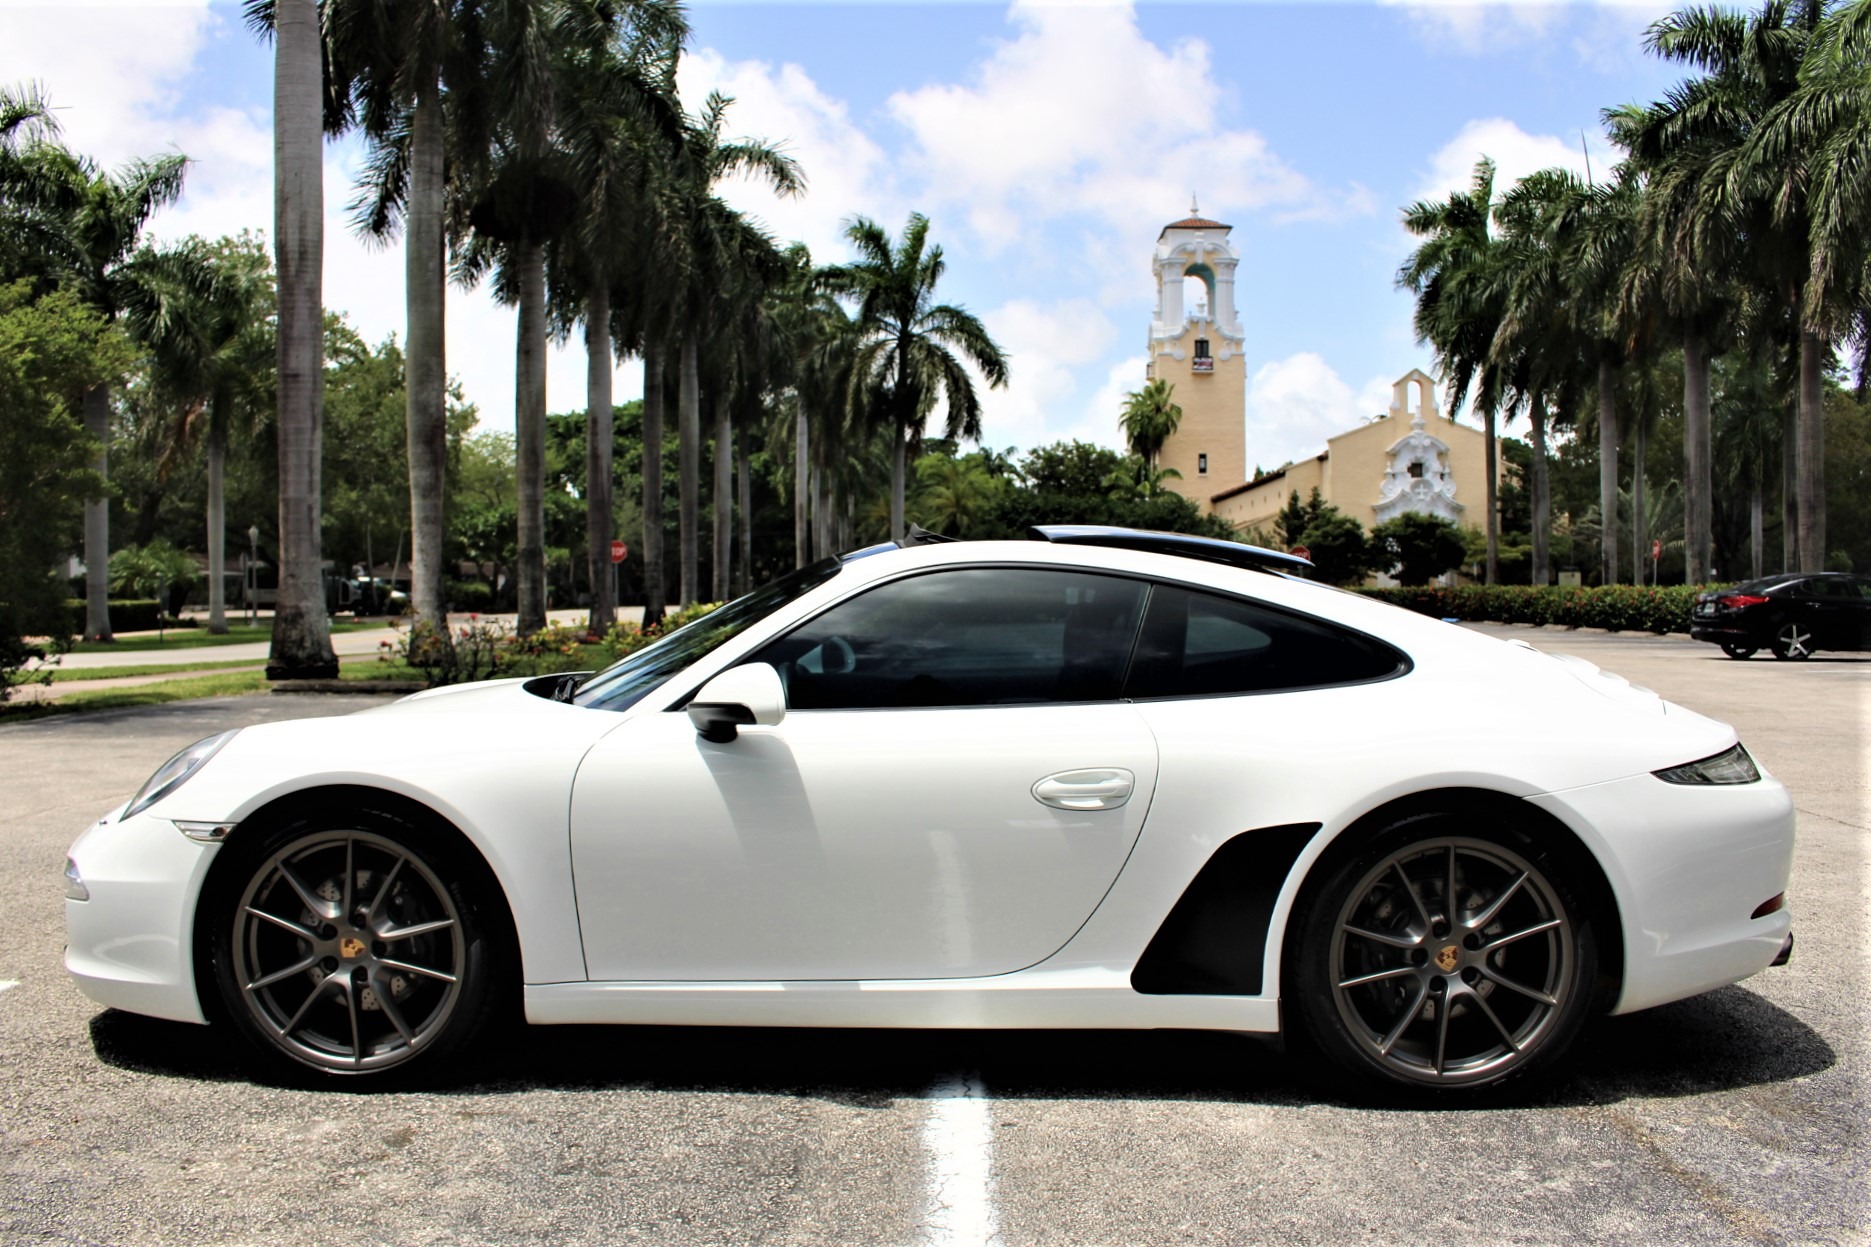 Used 2013 Porsche 911 Carrera for sale Sold at The Gables Sports Cars in Miami FL 33146 3